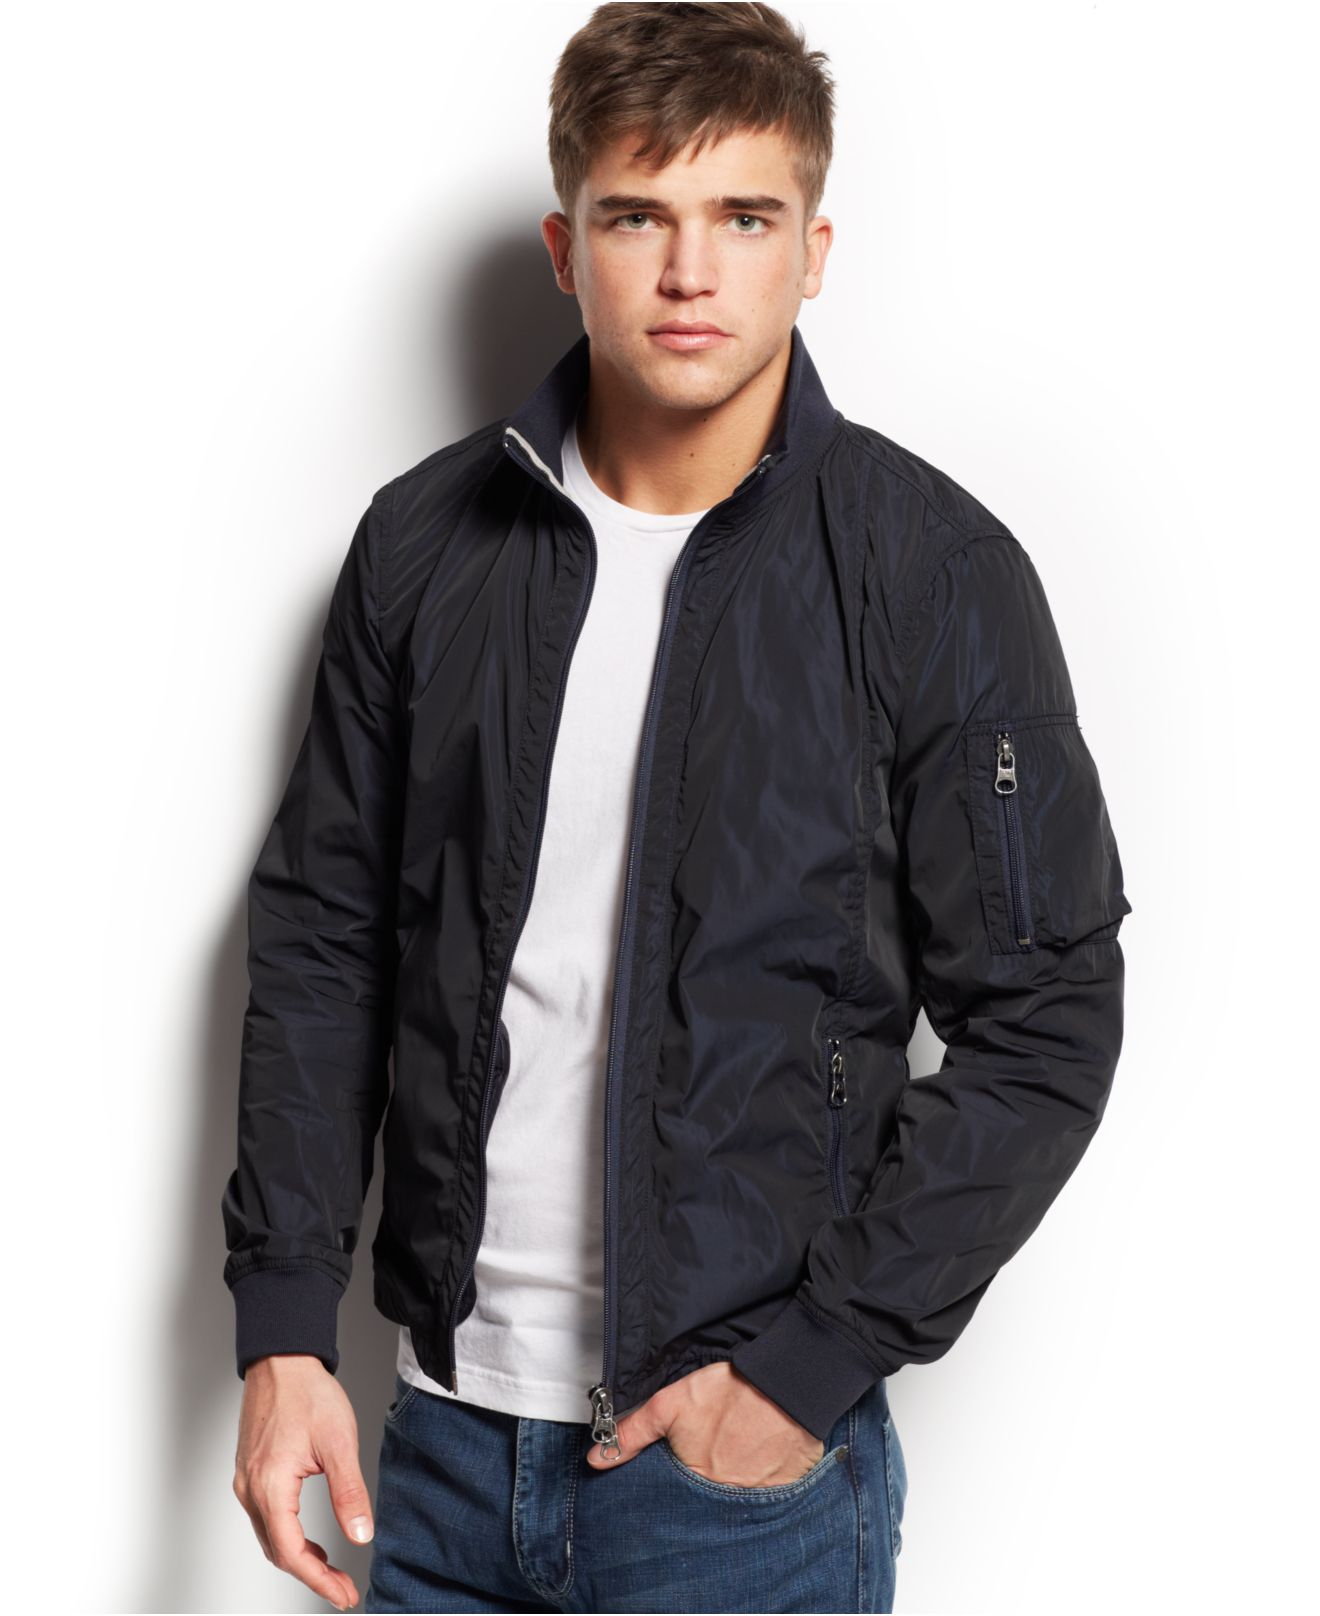 Armani Jeans Iridescent Bomber Jacket in Black for Men - Lyst